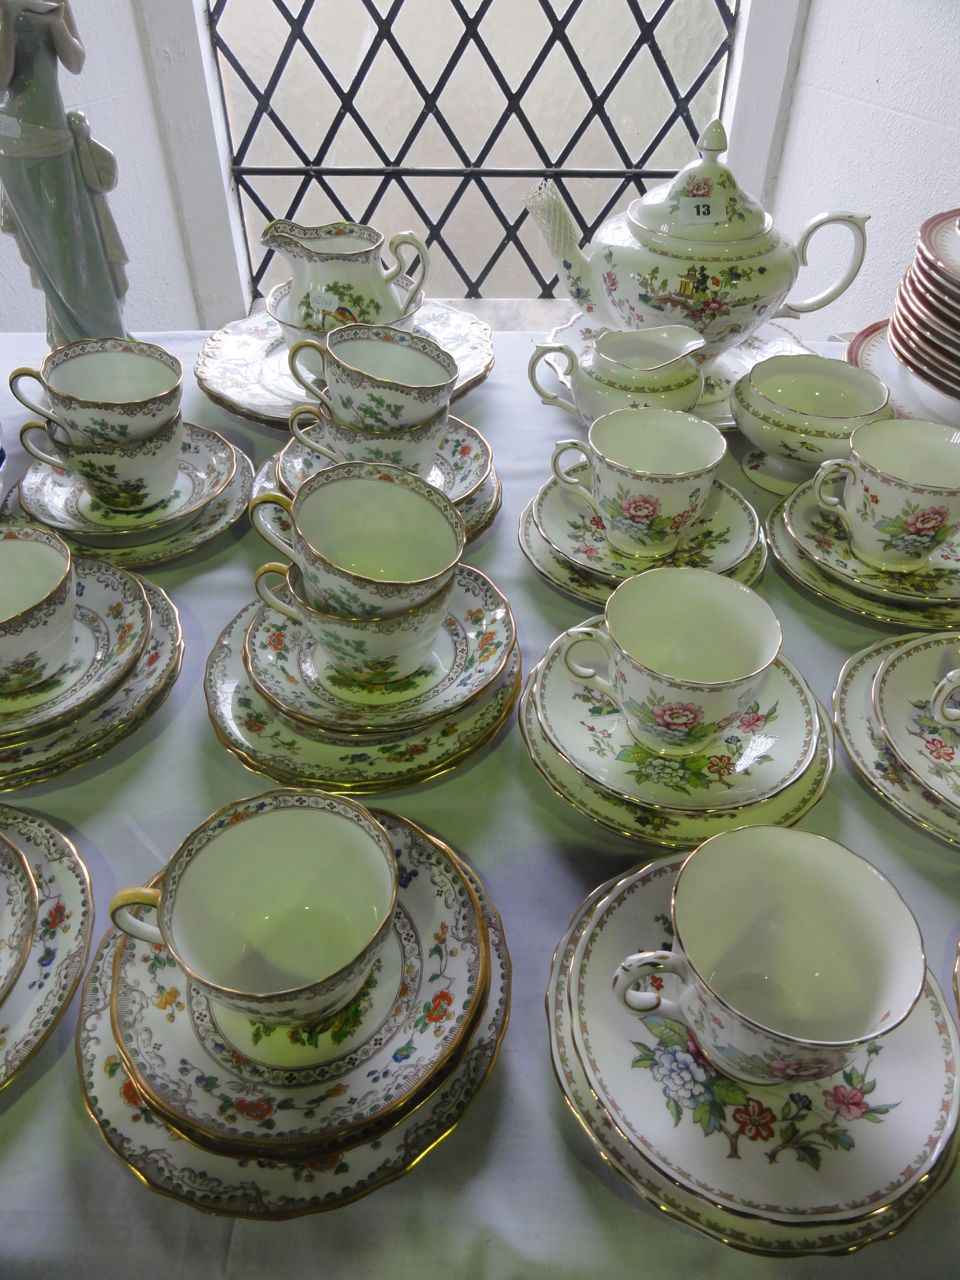 A quantity of Crown Staffordshire "Pagoda" pattern tea wares including teapot, bread plate, sugar